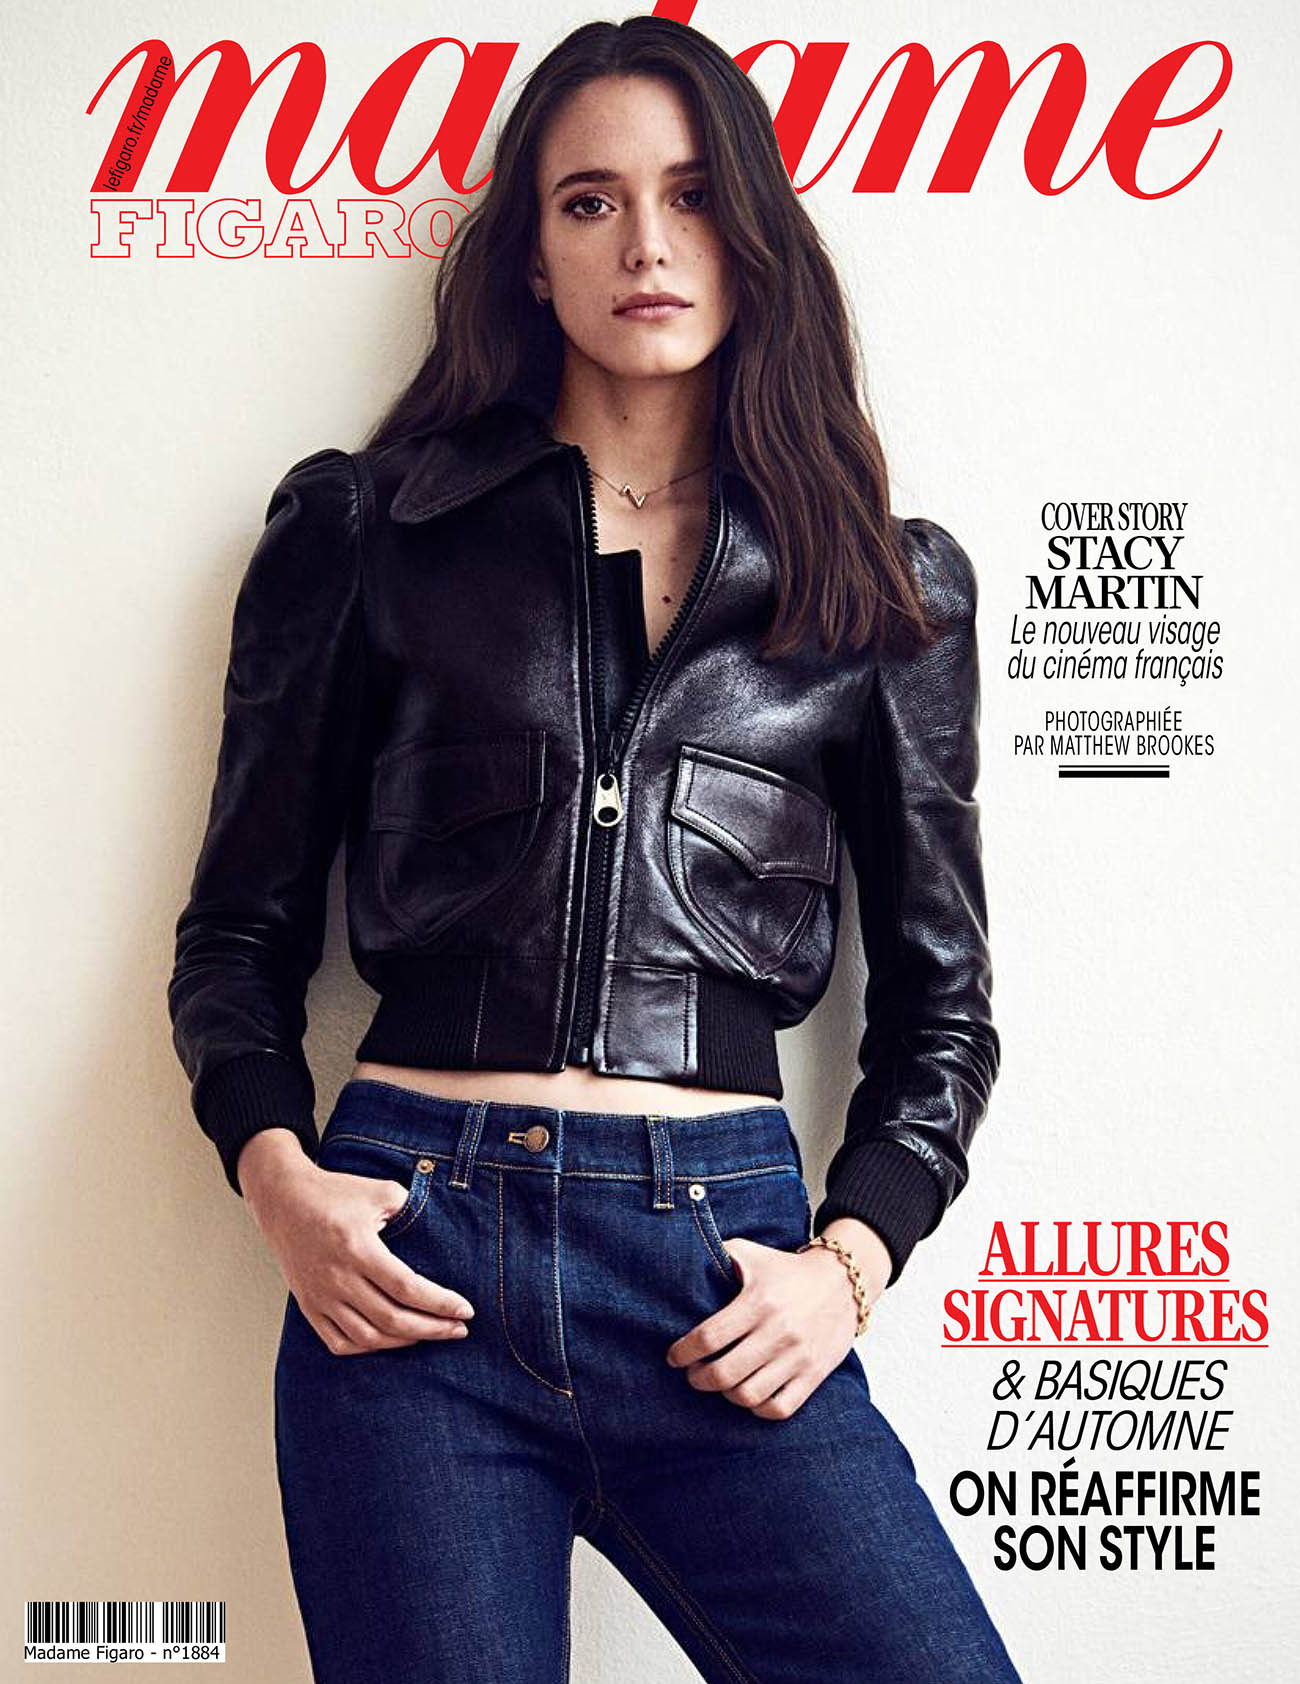 Stacy Martin covers Madame Figaro October 2nd, 2020 by Matthew Brookes